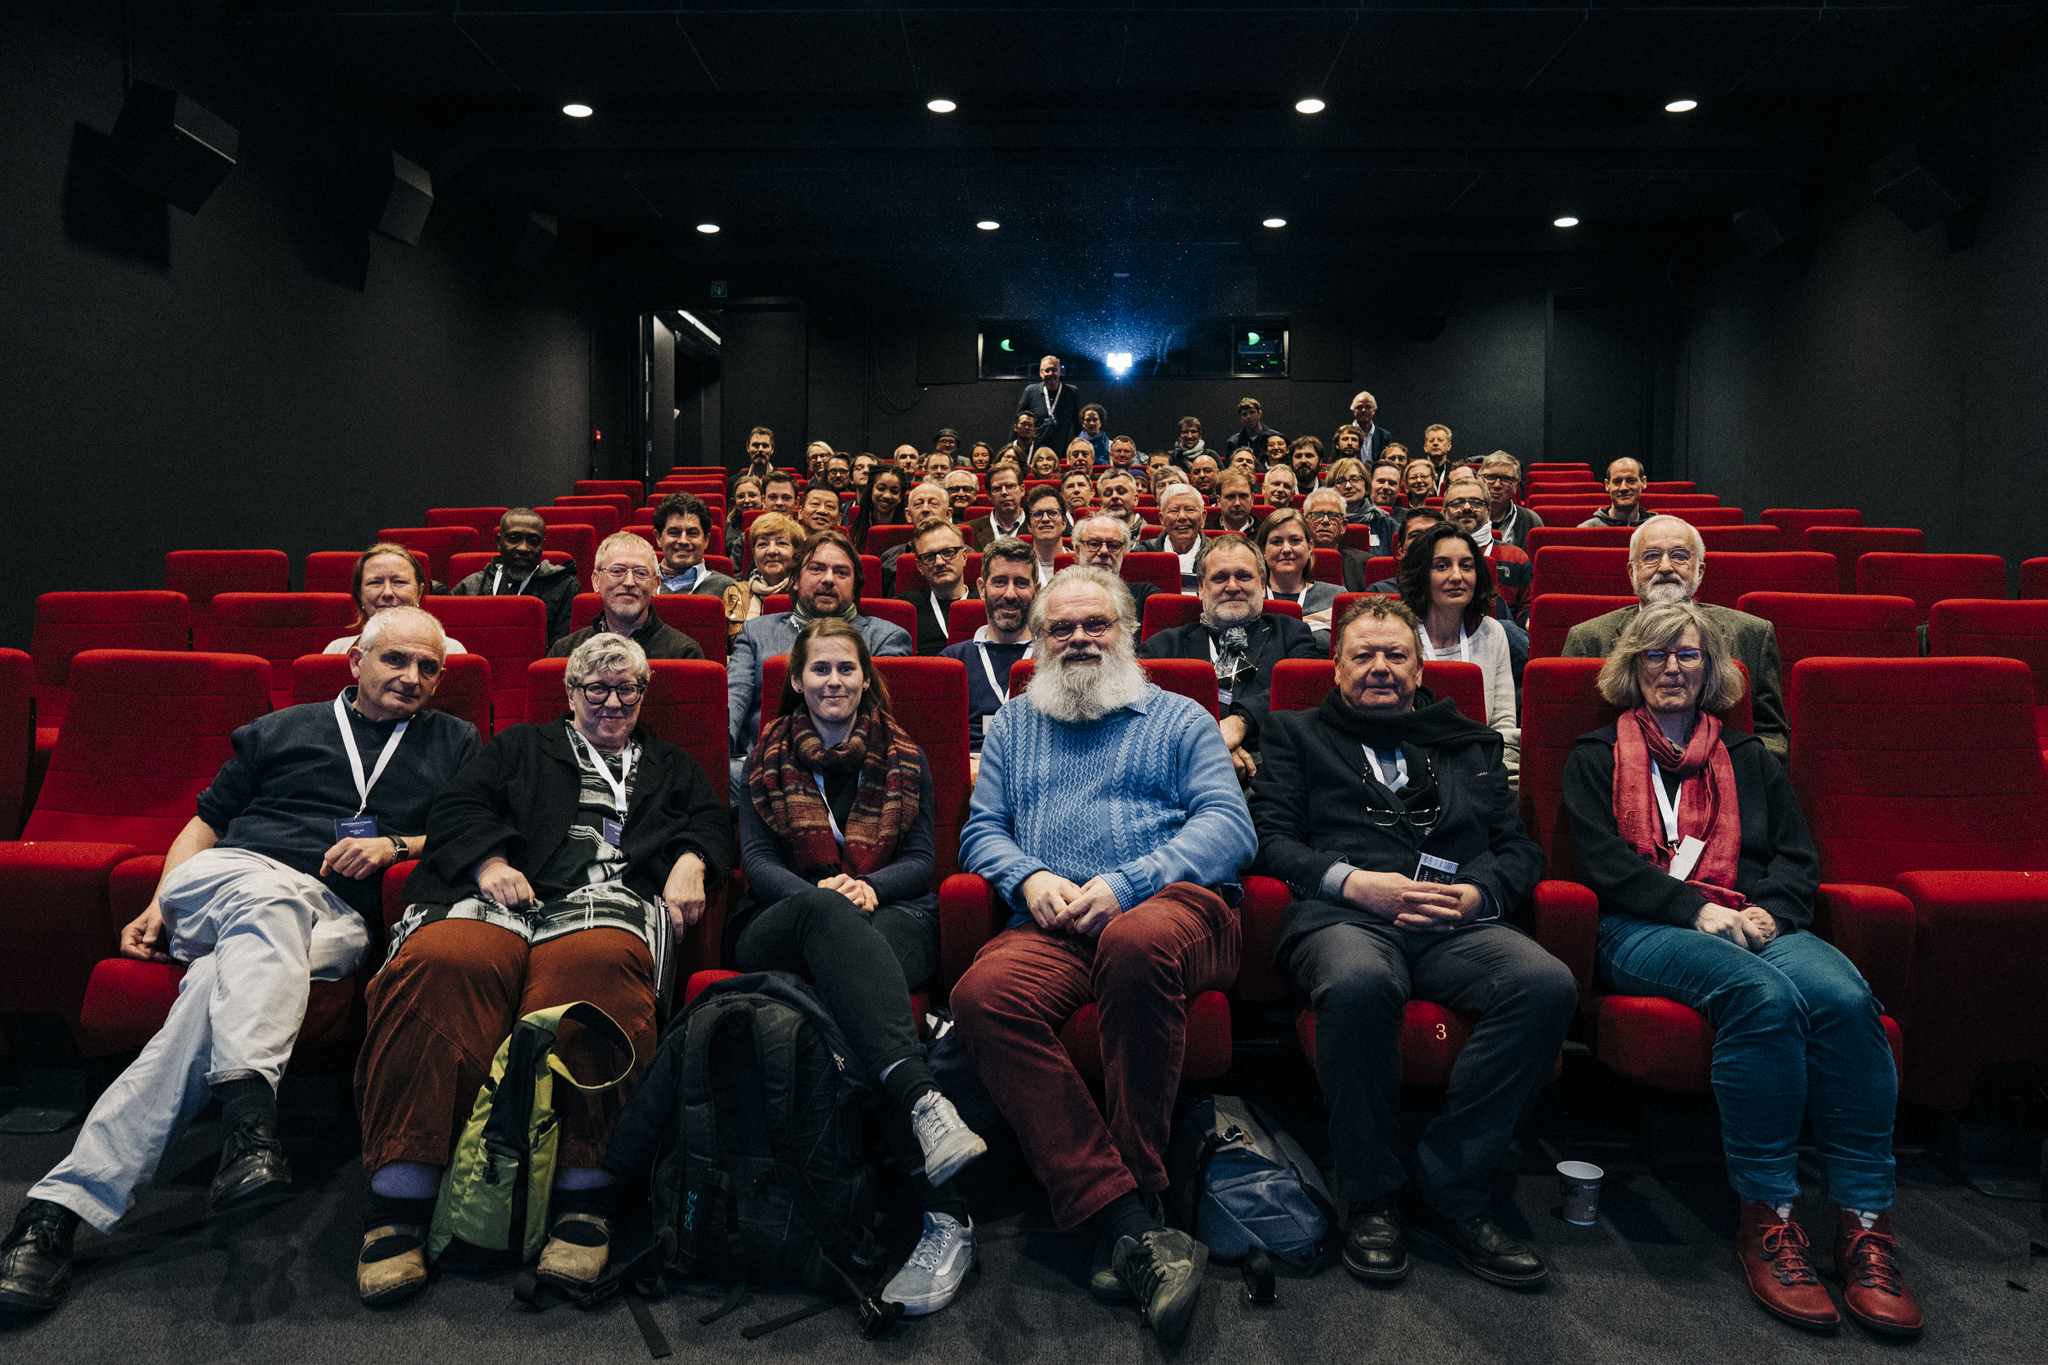 Participants of the Cinematography in Progress 3 conference